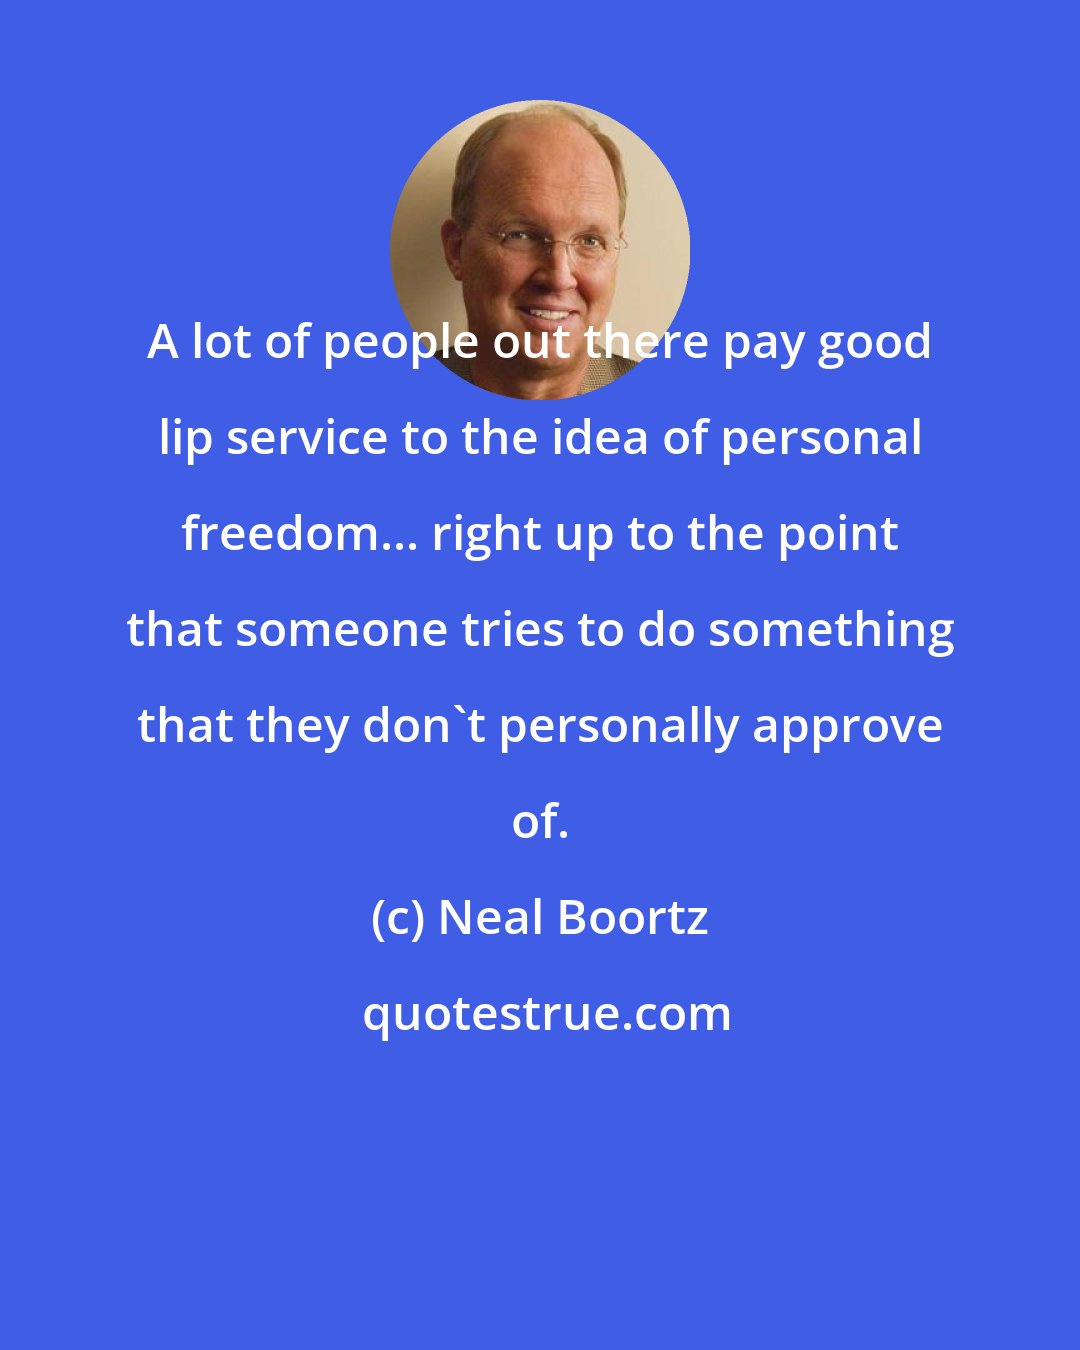 Neal Boortz: A lot of people out there pay good lip service to the idea of personal freedom... right up to the point that someone tries to do something that they don't personally approve of.